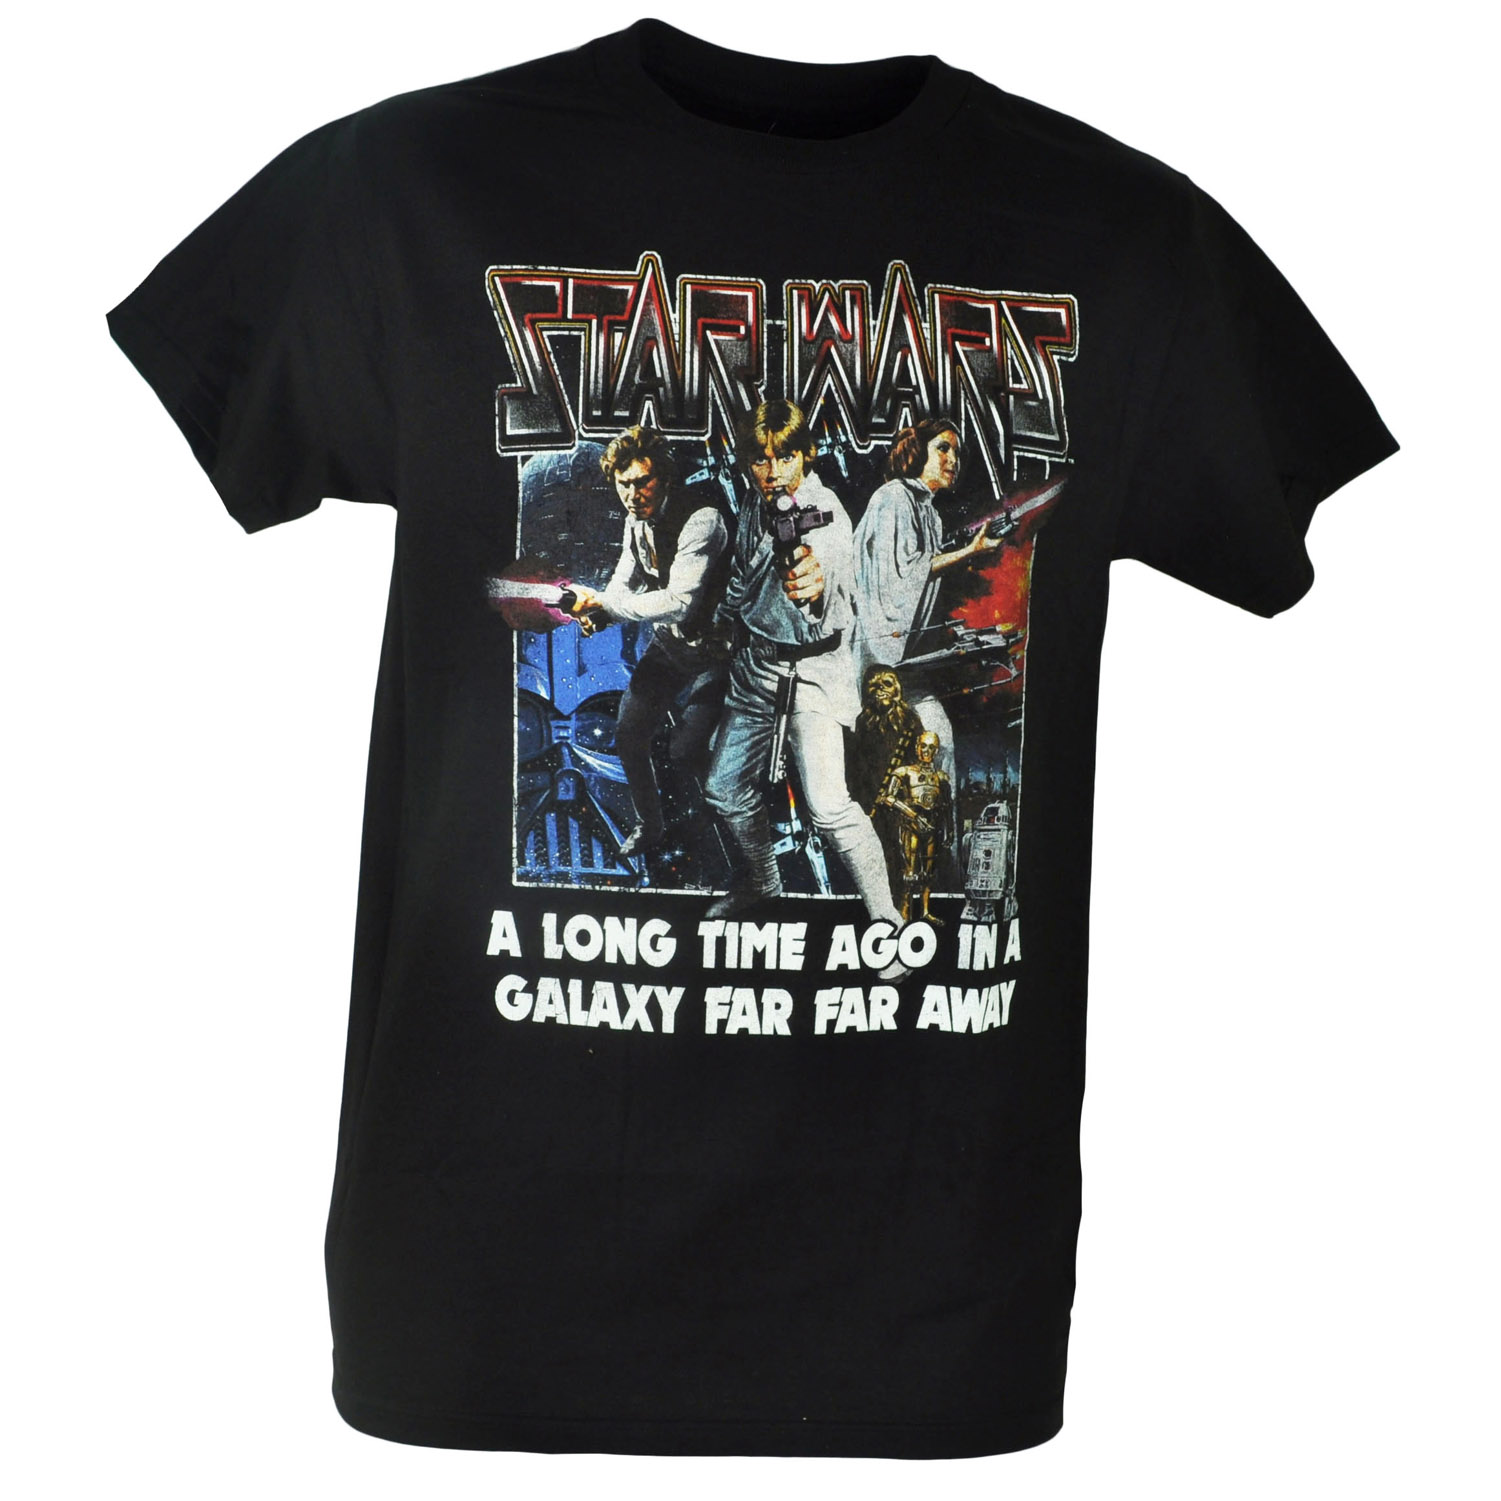 A Long Time Ago In A Galaxy Far Away Graphic Black Tshirt Tee XLarge - image 1 of 1